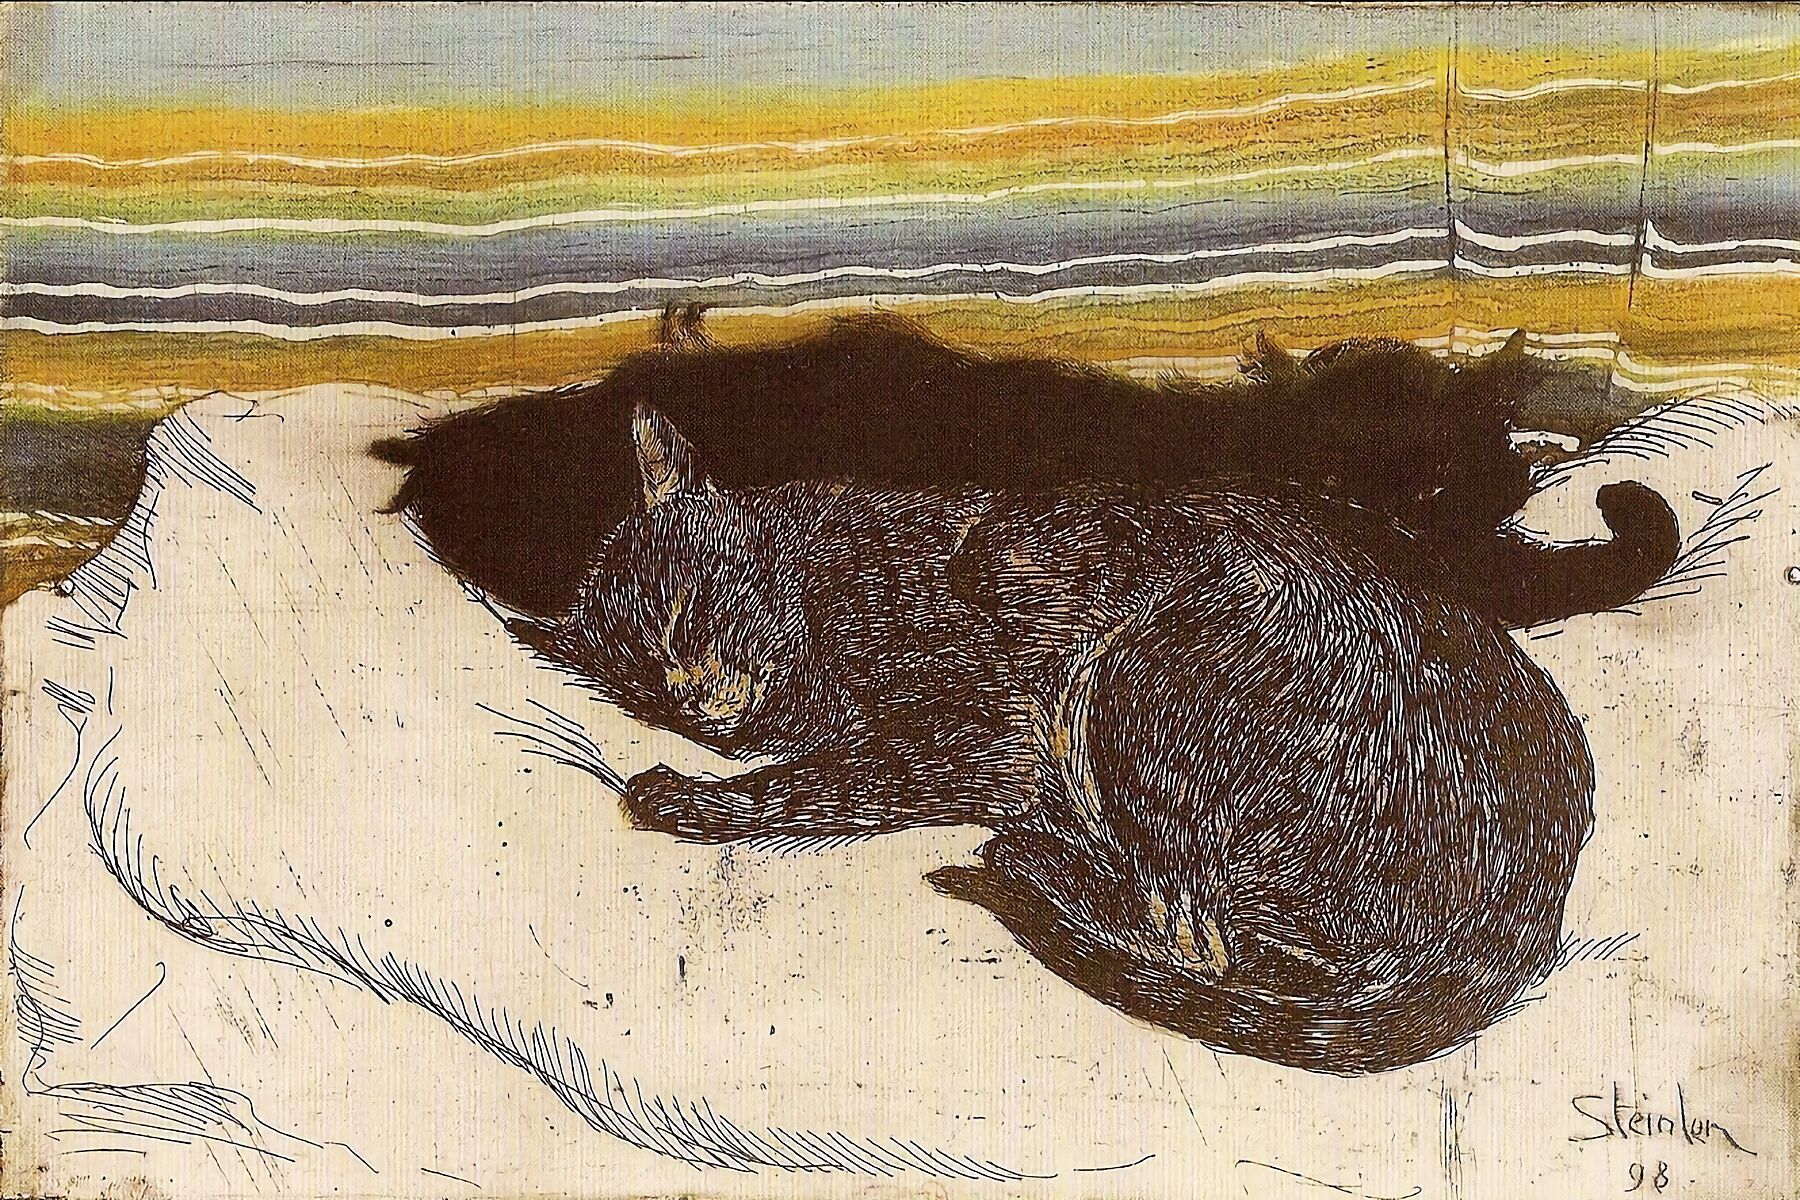 Two Cats by Théophile Steinlen - 1898